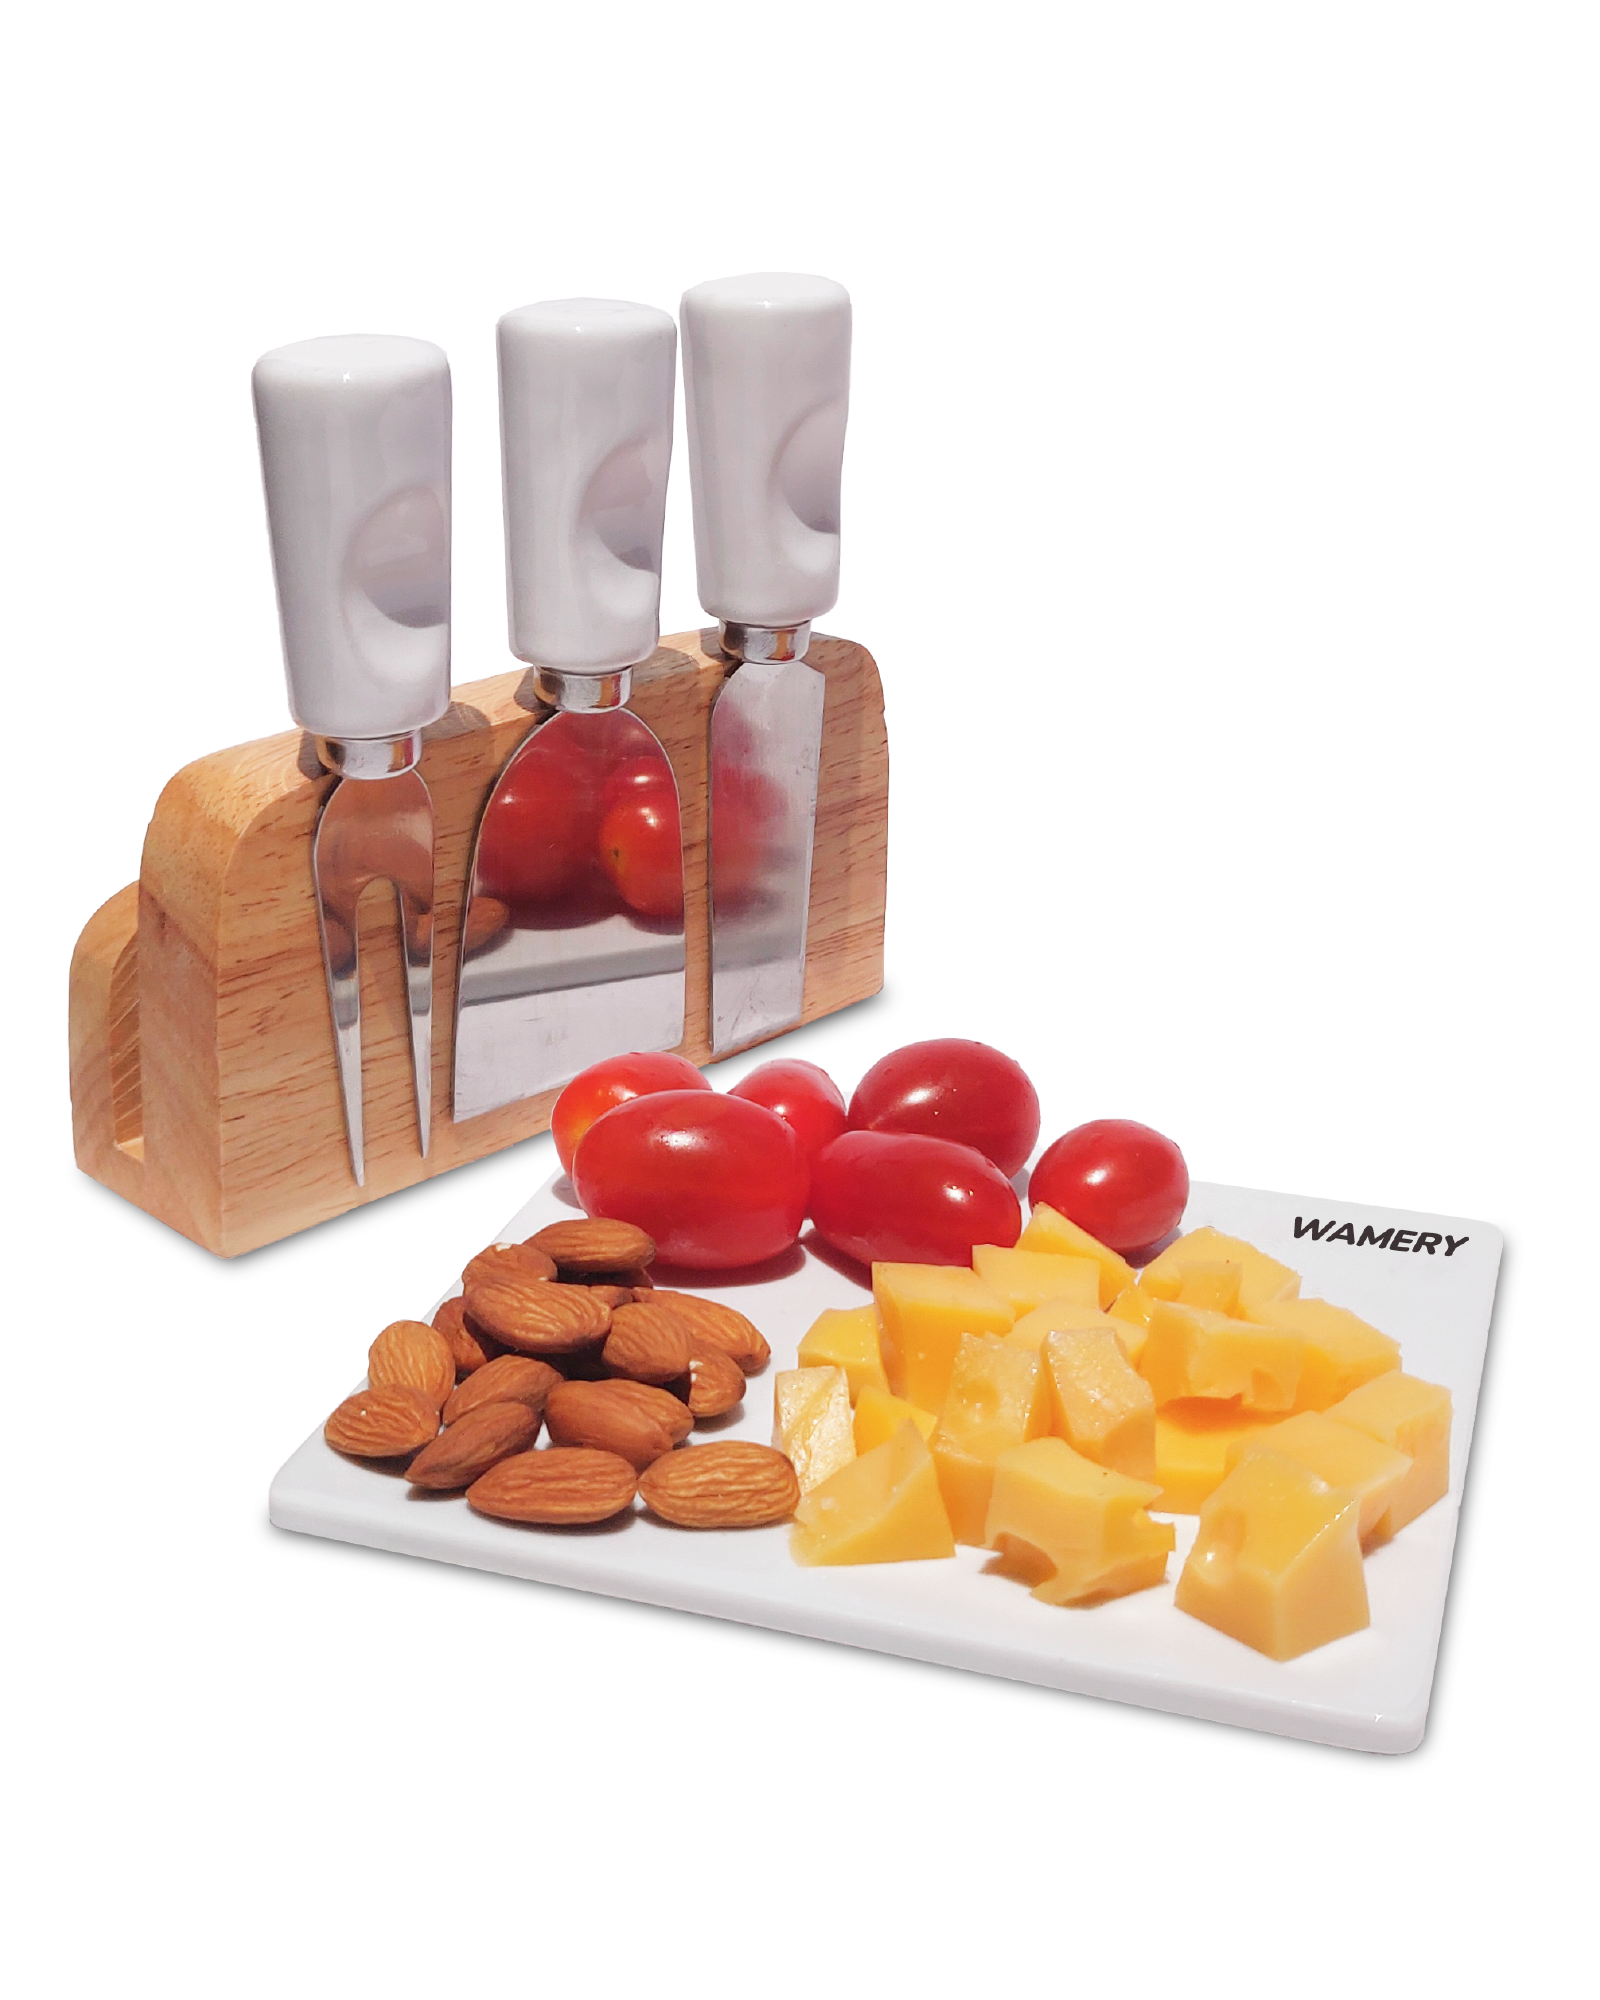 3-Piece Cheese Board Set - With Ceramic Board & Magnetic Knife Holder